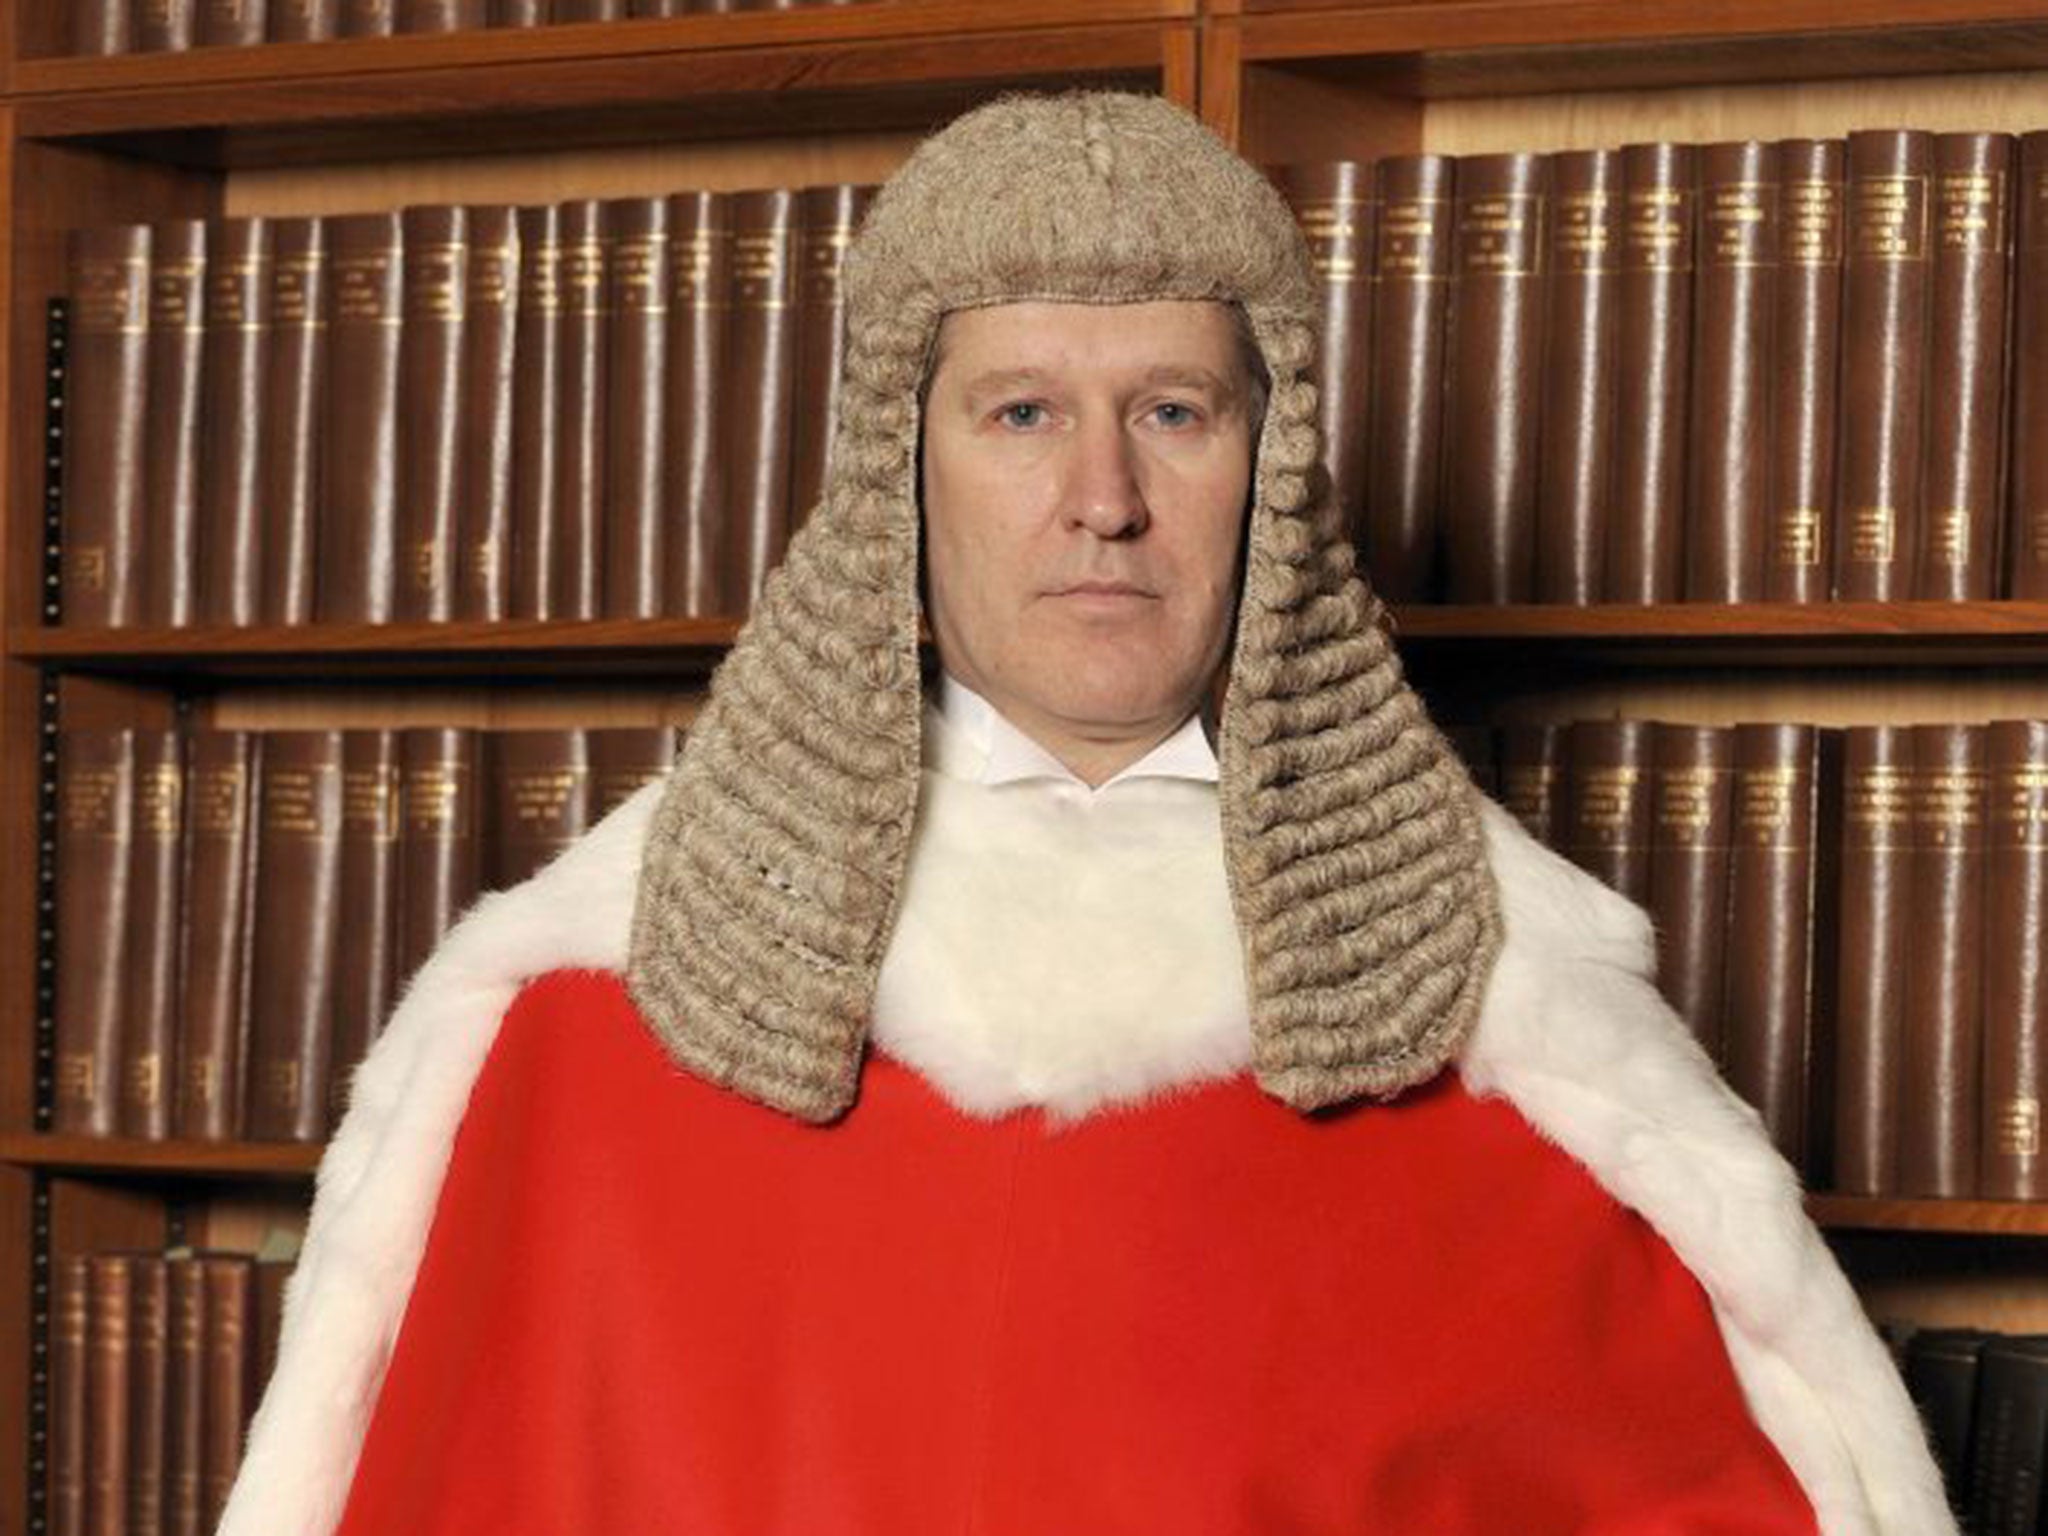 Mr Justice Peter Jackson outlined 12 major failings by police